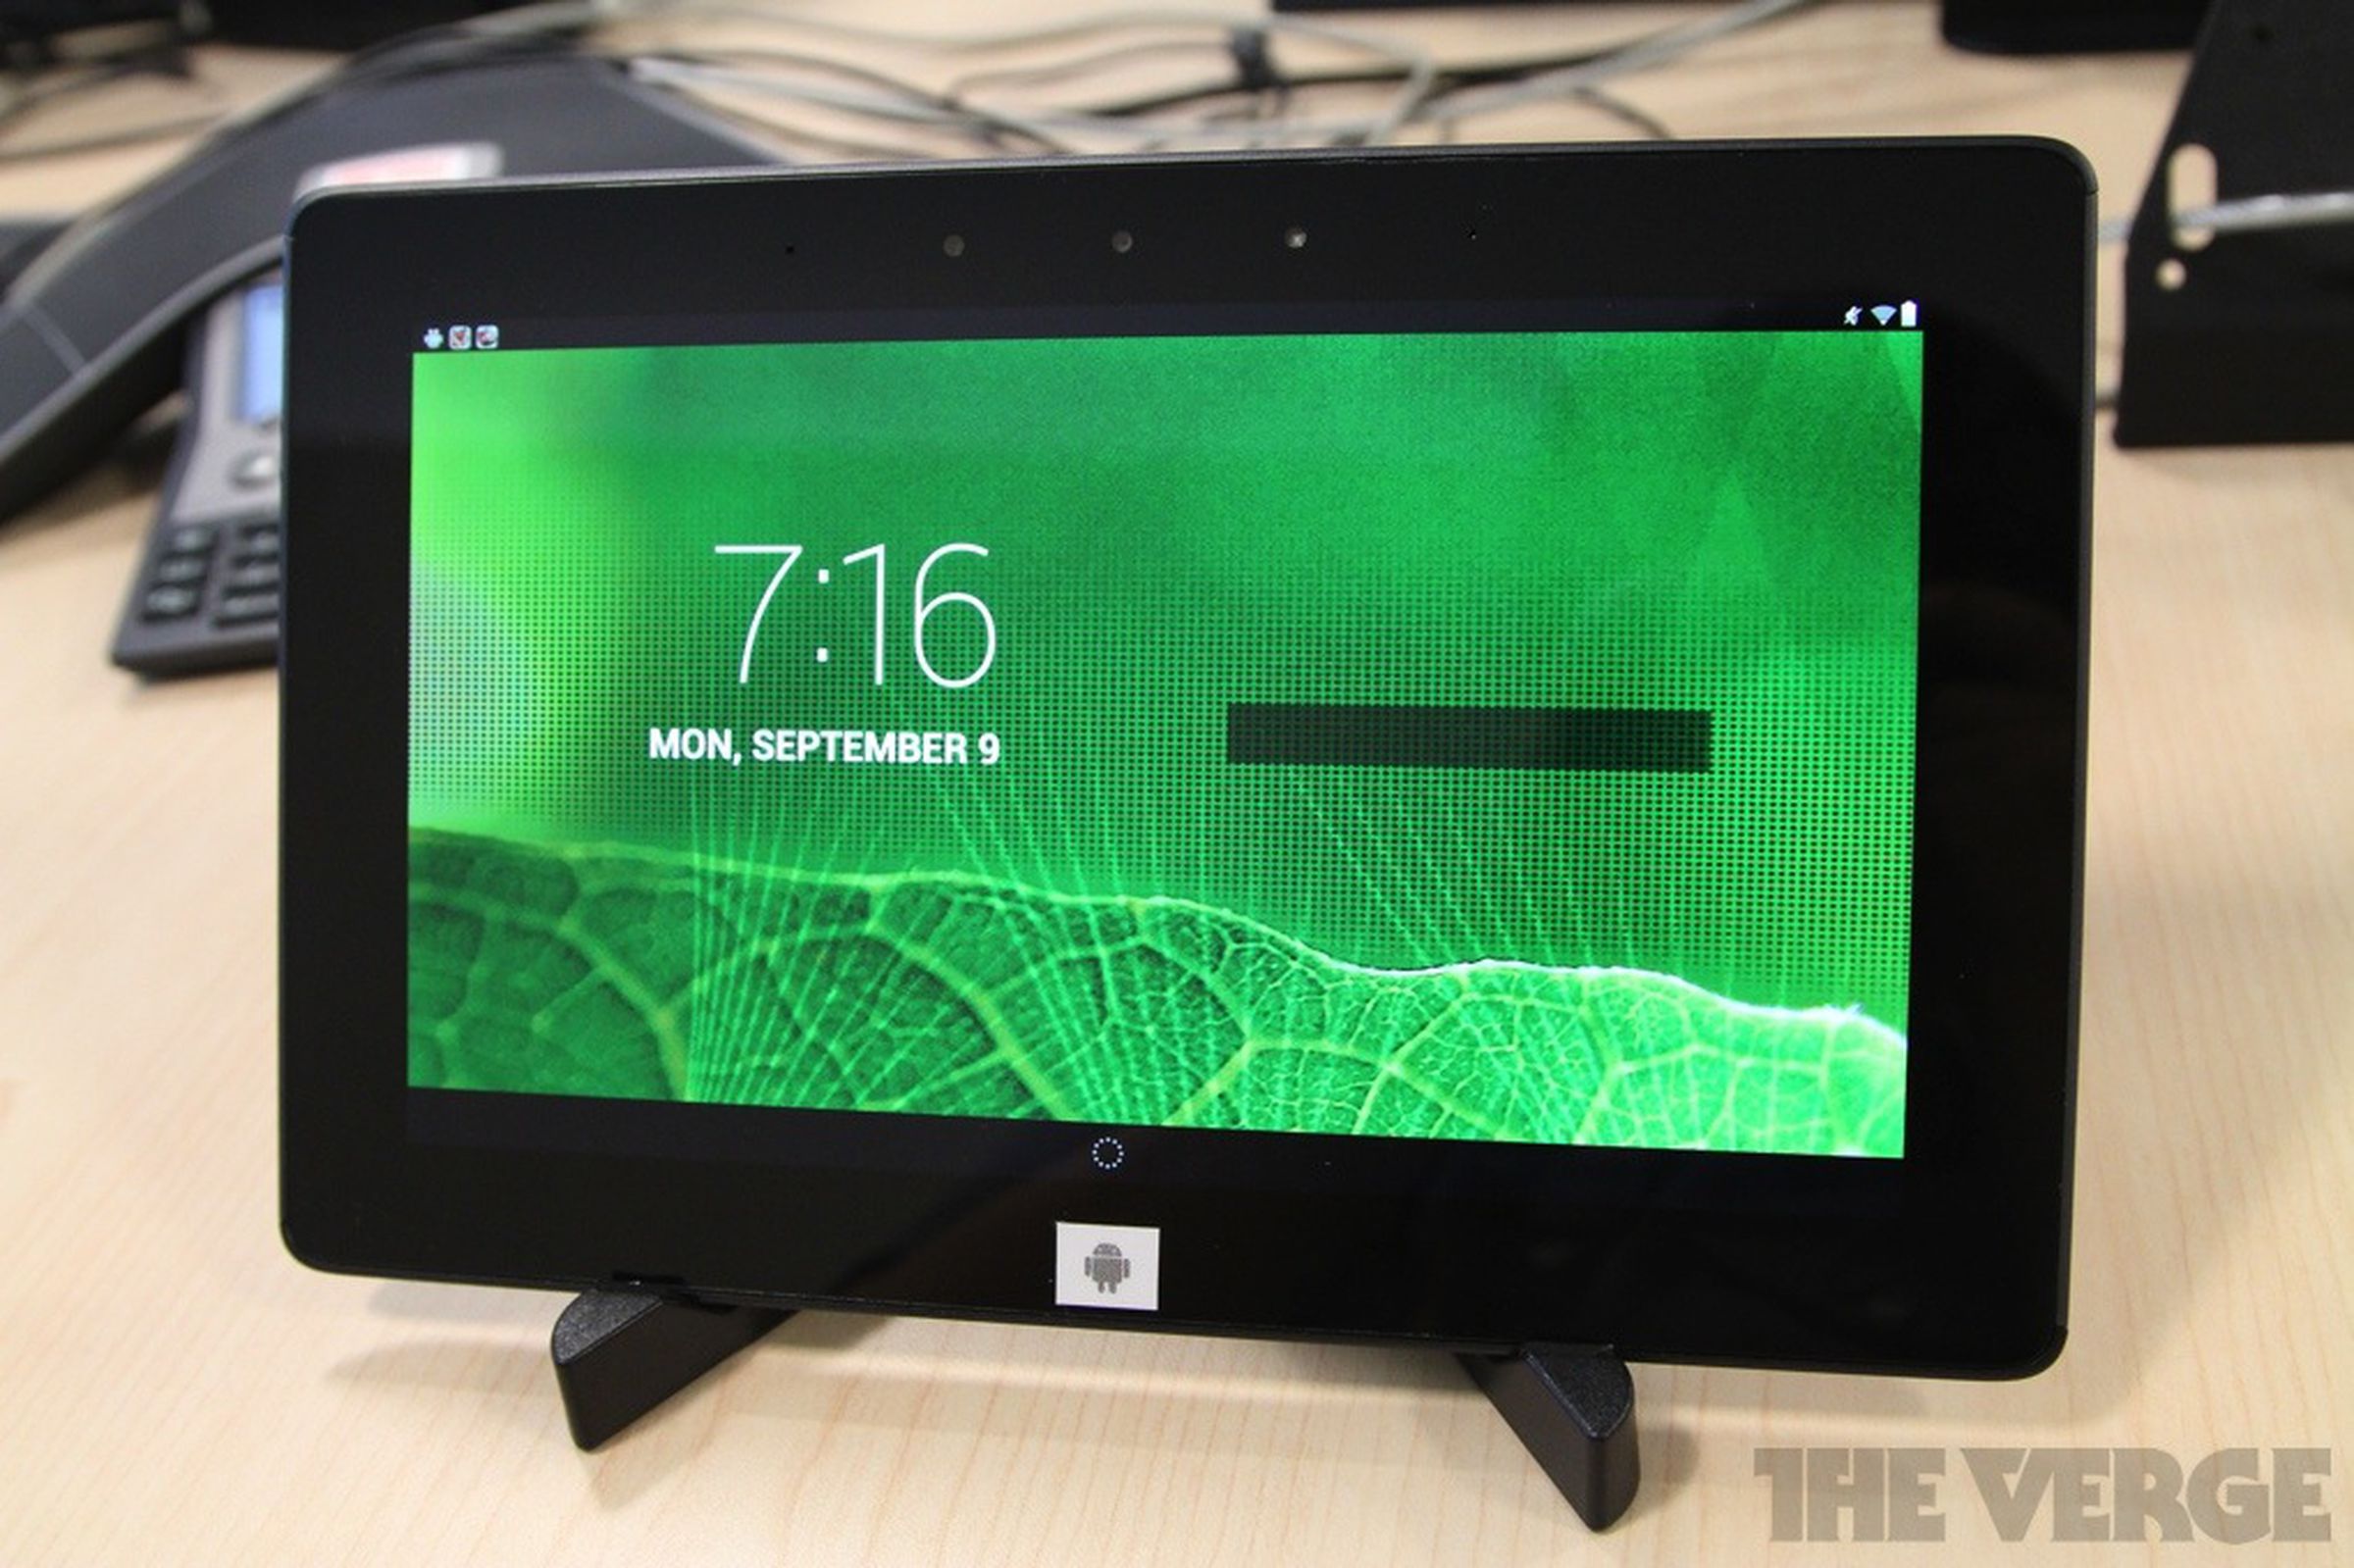 Intel Bay Trail tablet reference designs